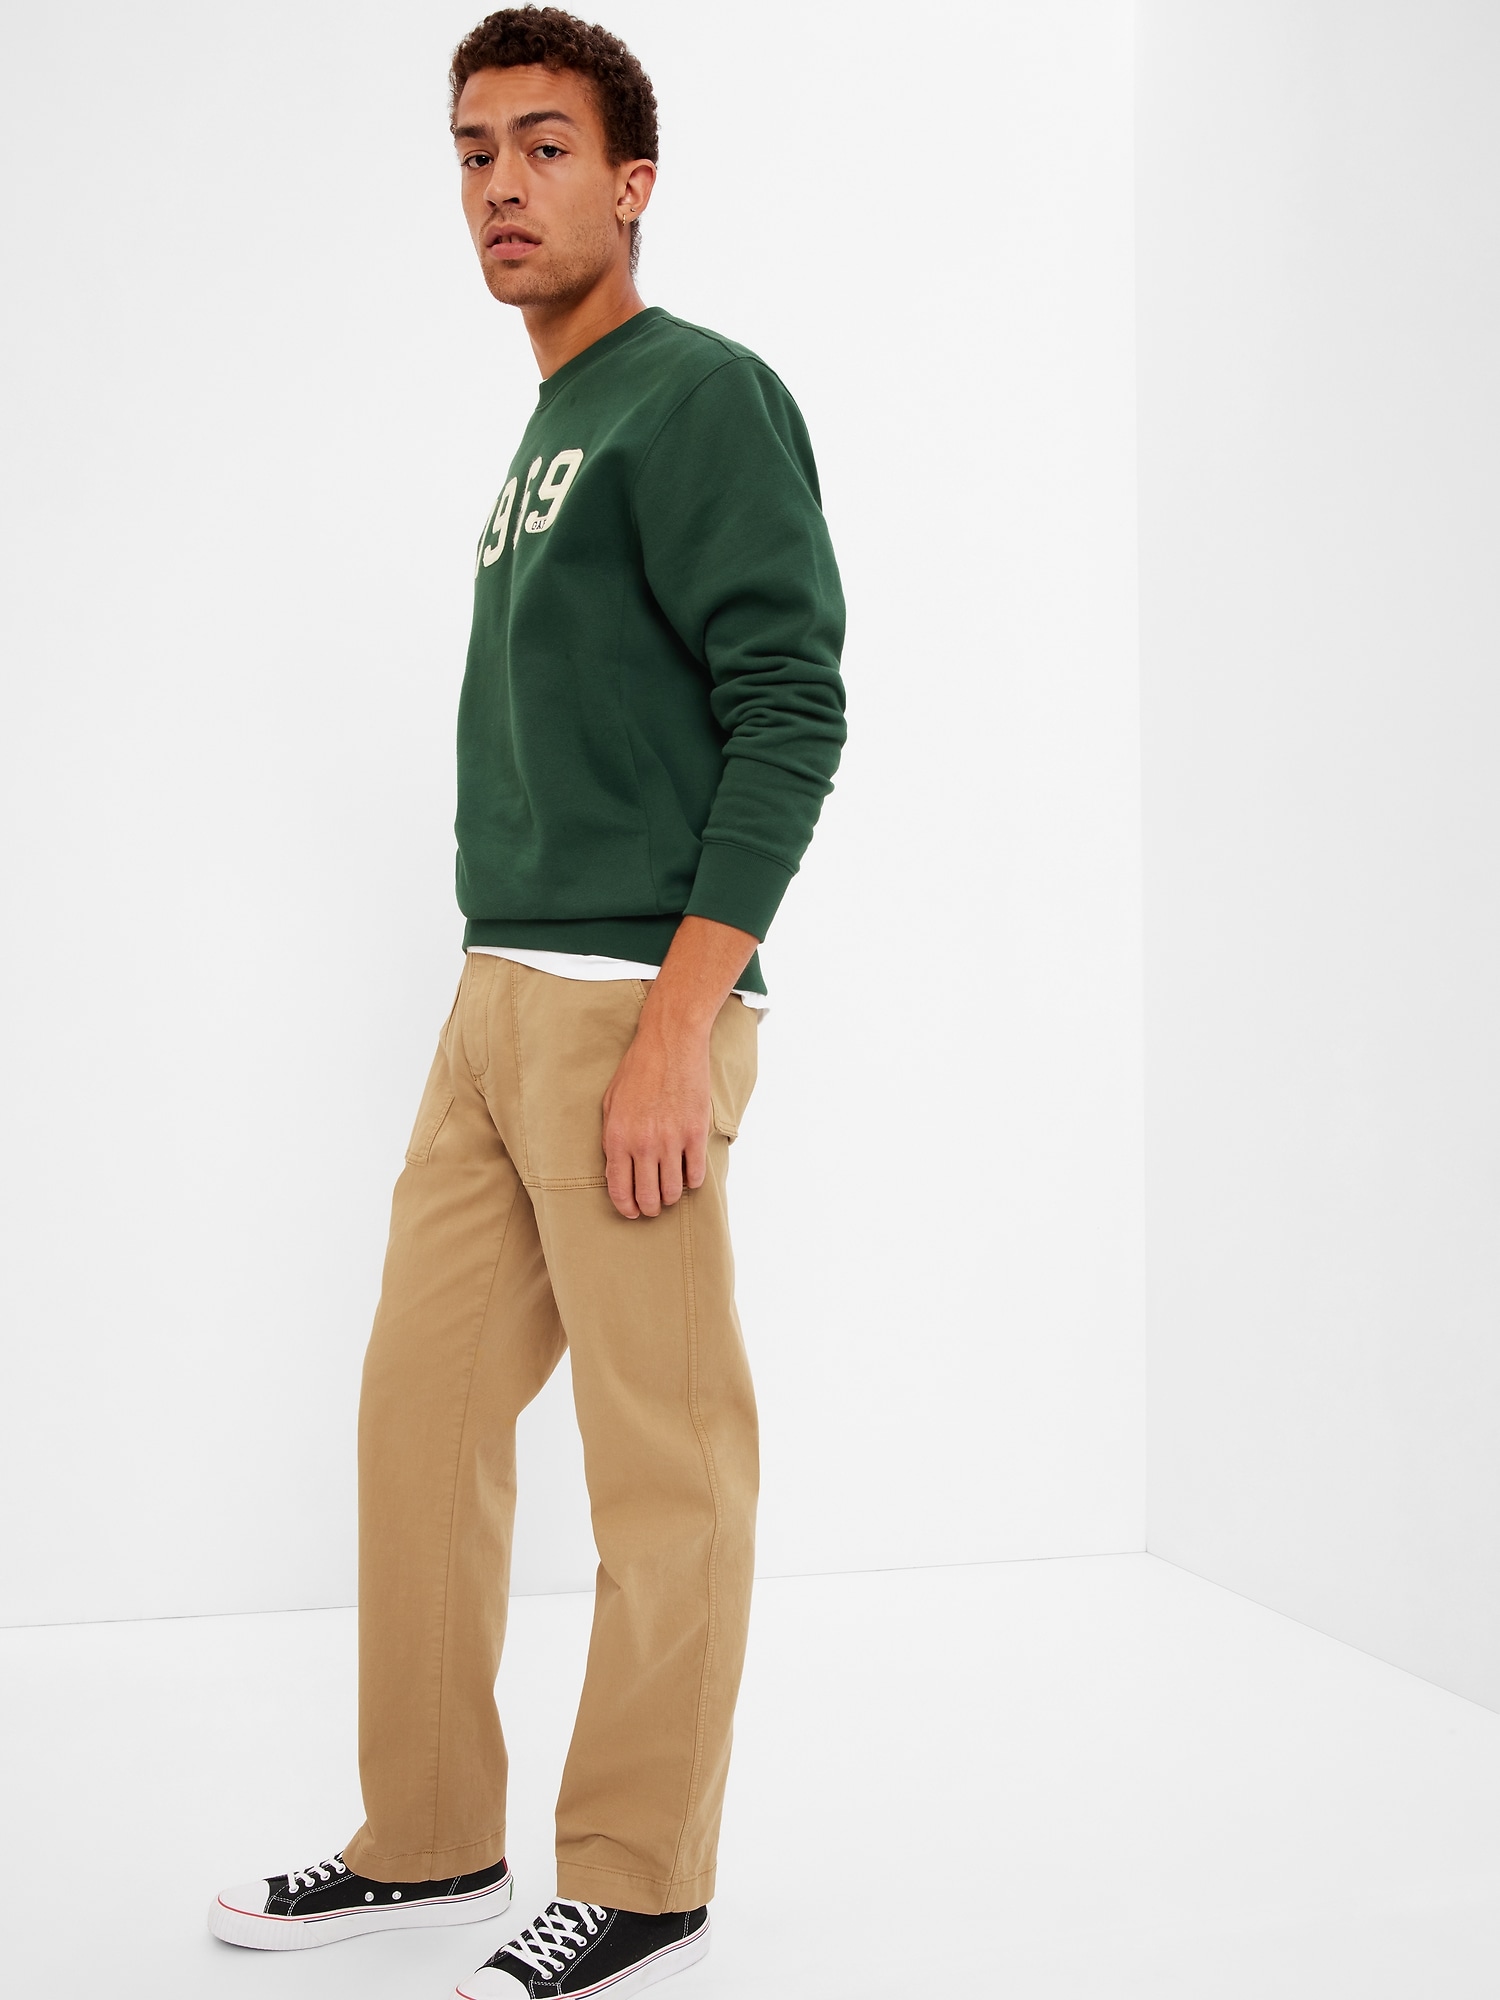 Relaxed Fatigue Pants